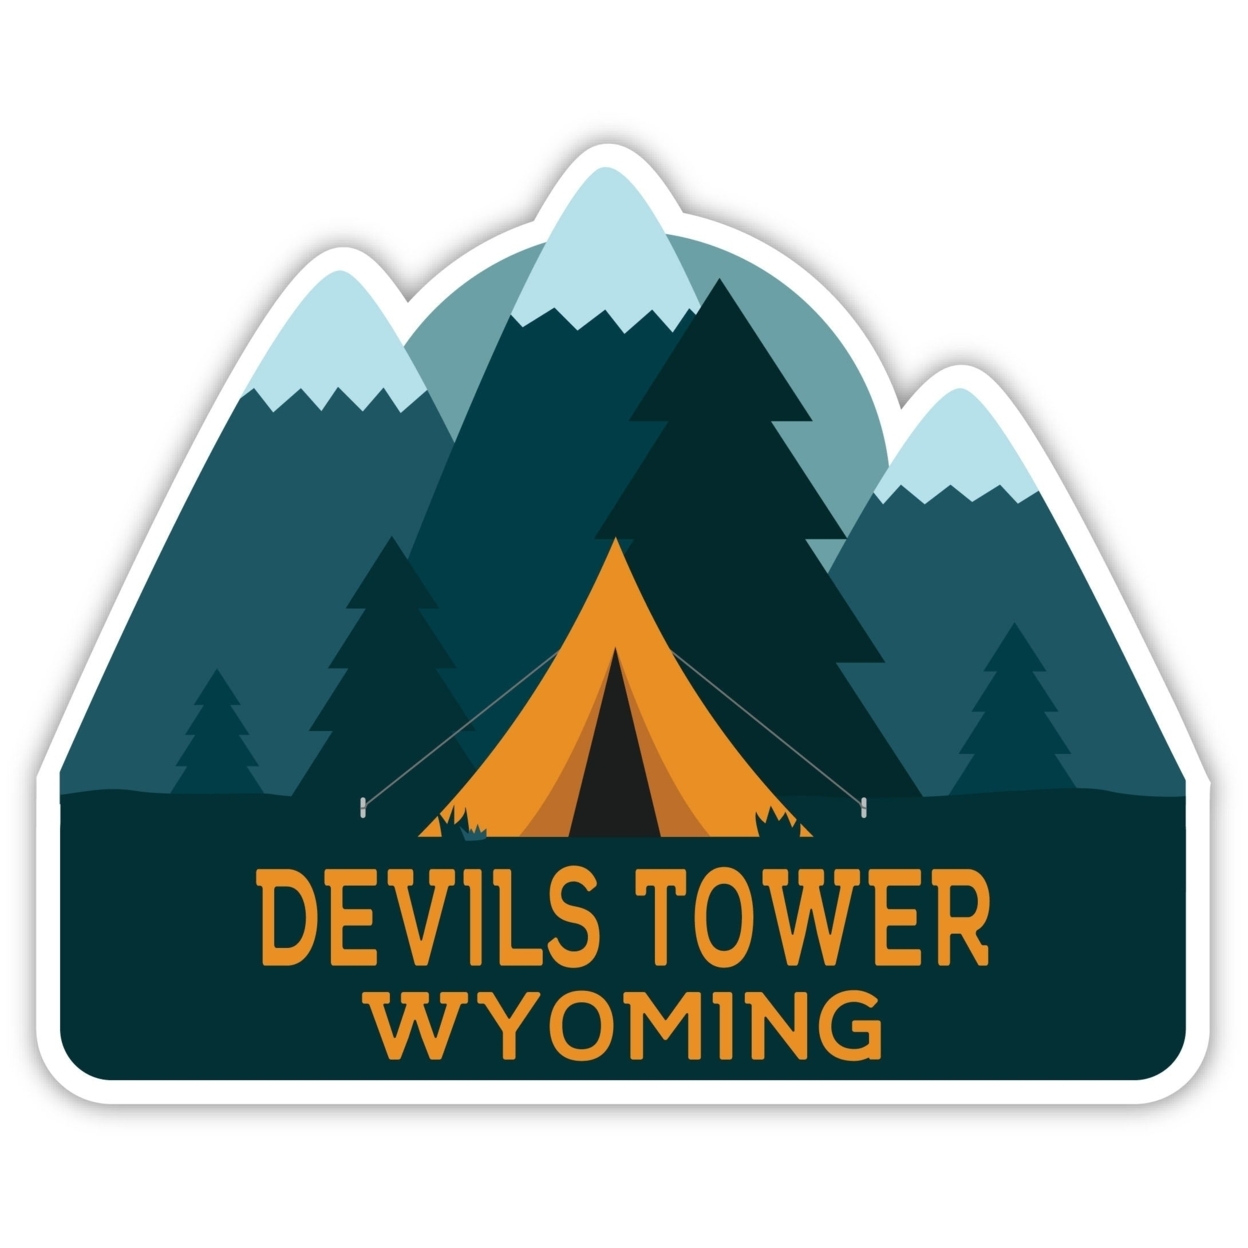 Devils Tower Wyoming Souvenir Decorative Stickers (Choose Theme And Size) - 4-Pack, 4-Inch, Great Outdoors